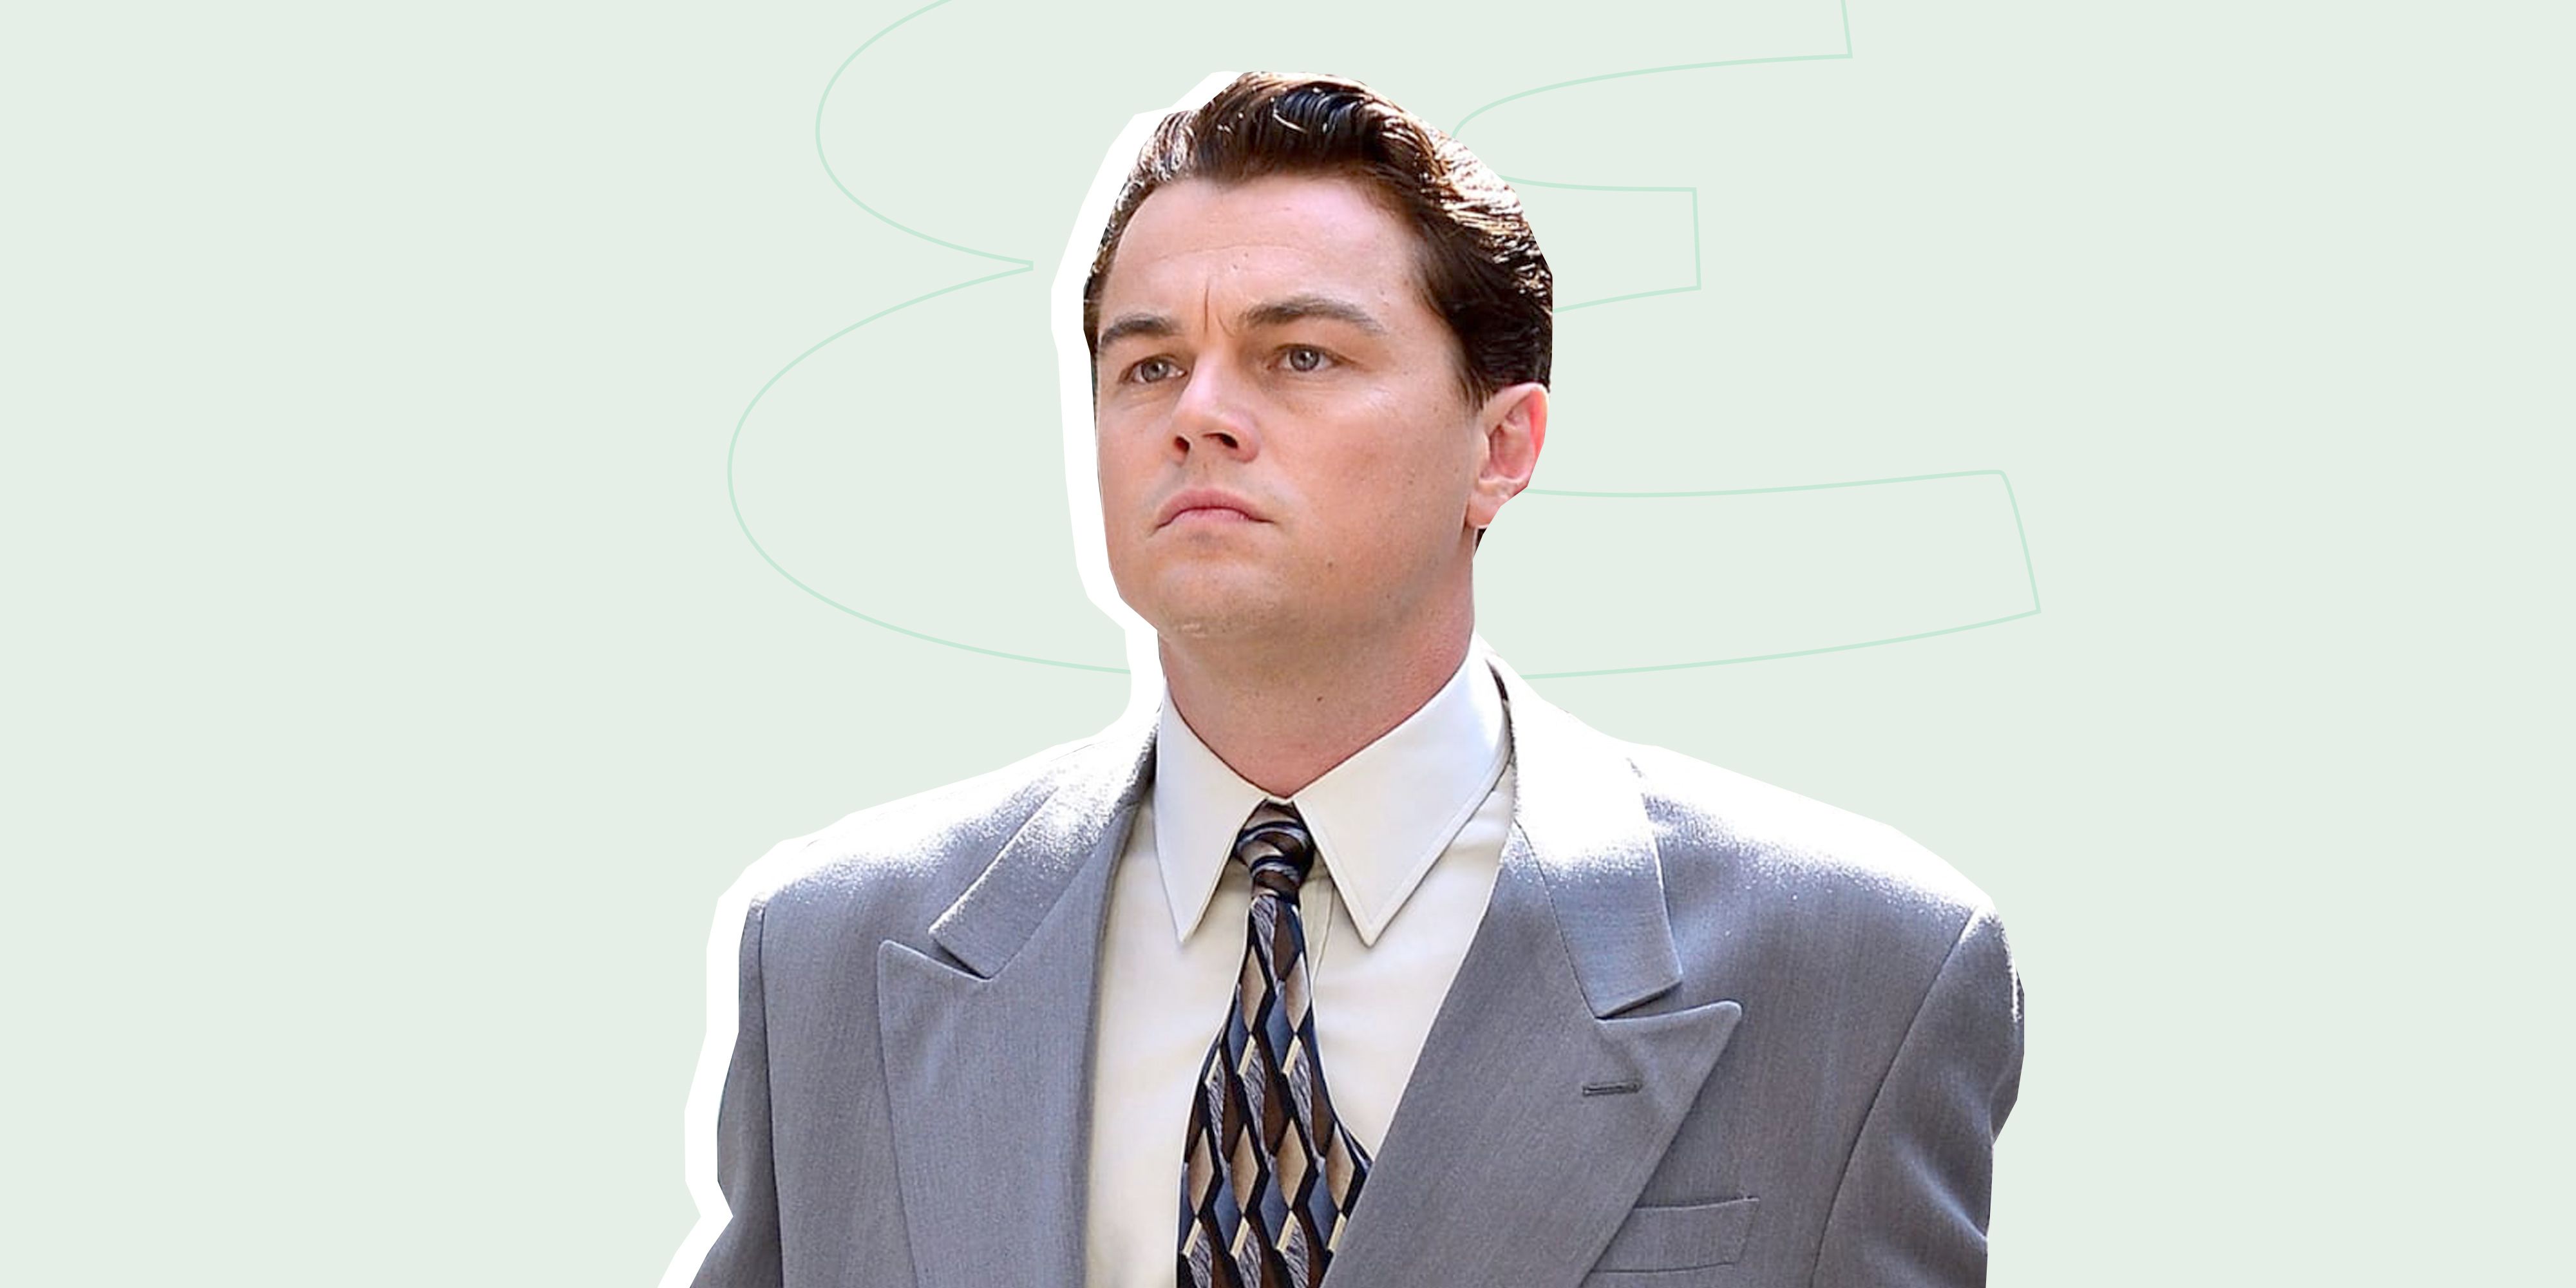 The Wolf Of Wall Street Scene You Didn't Realize Was Improvised